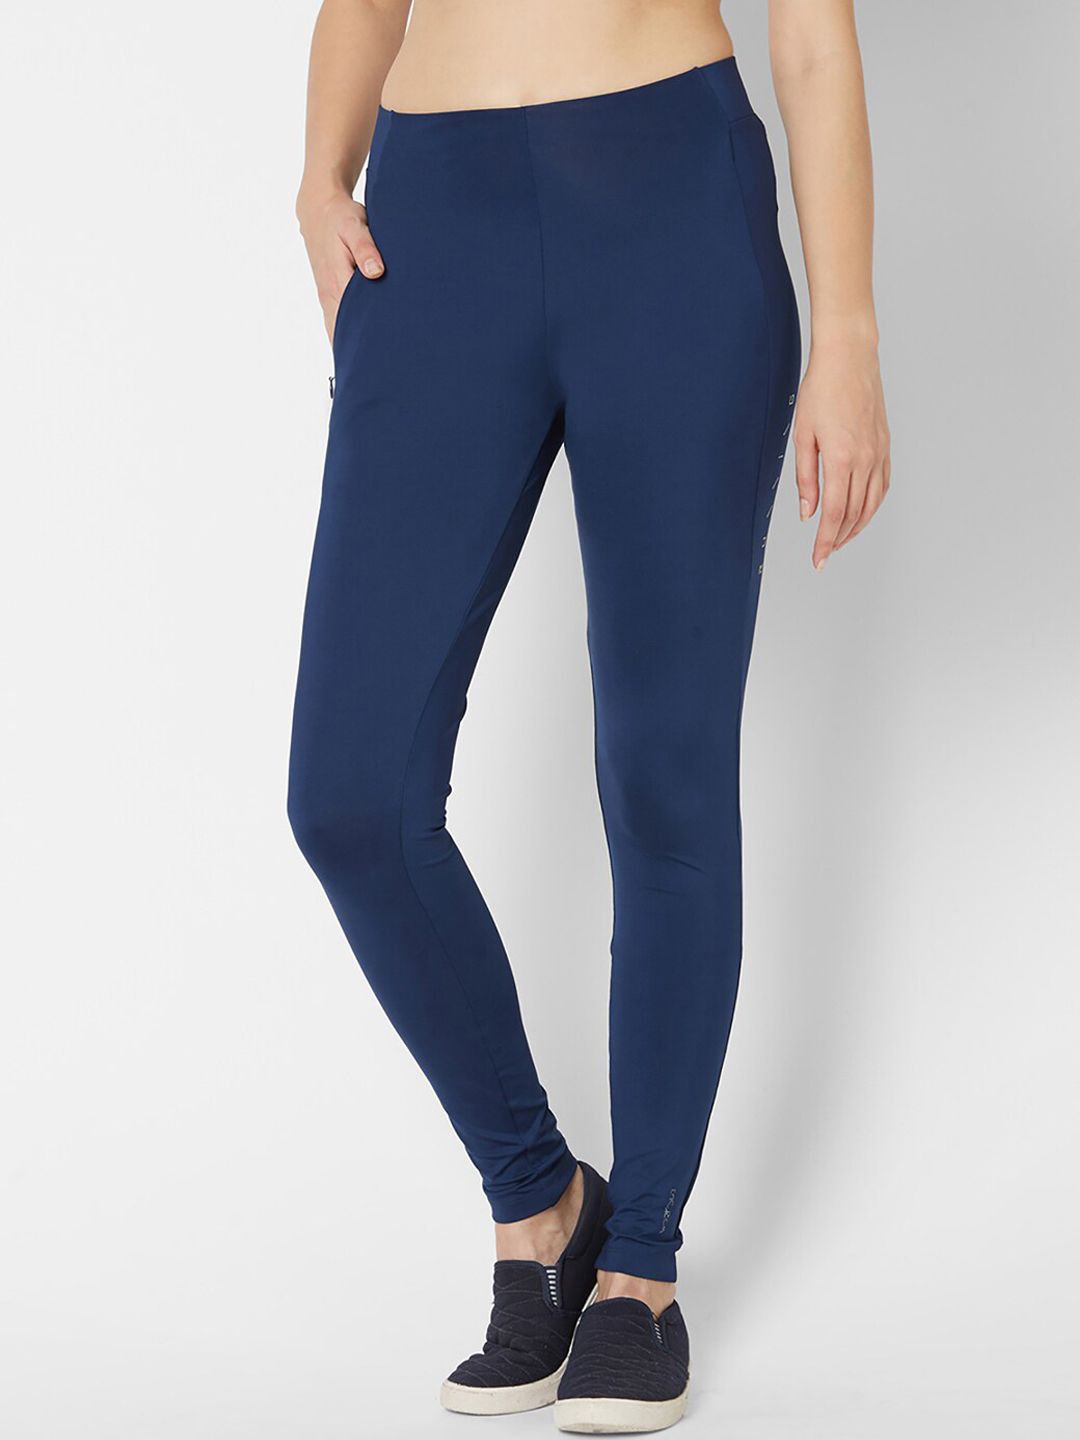 Sweet Dreams Women Navy Blue Solid Tights Price in India